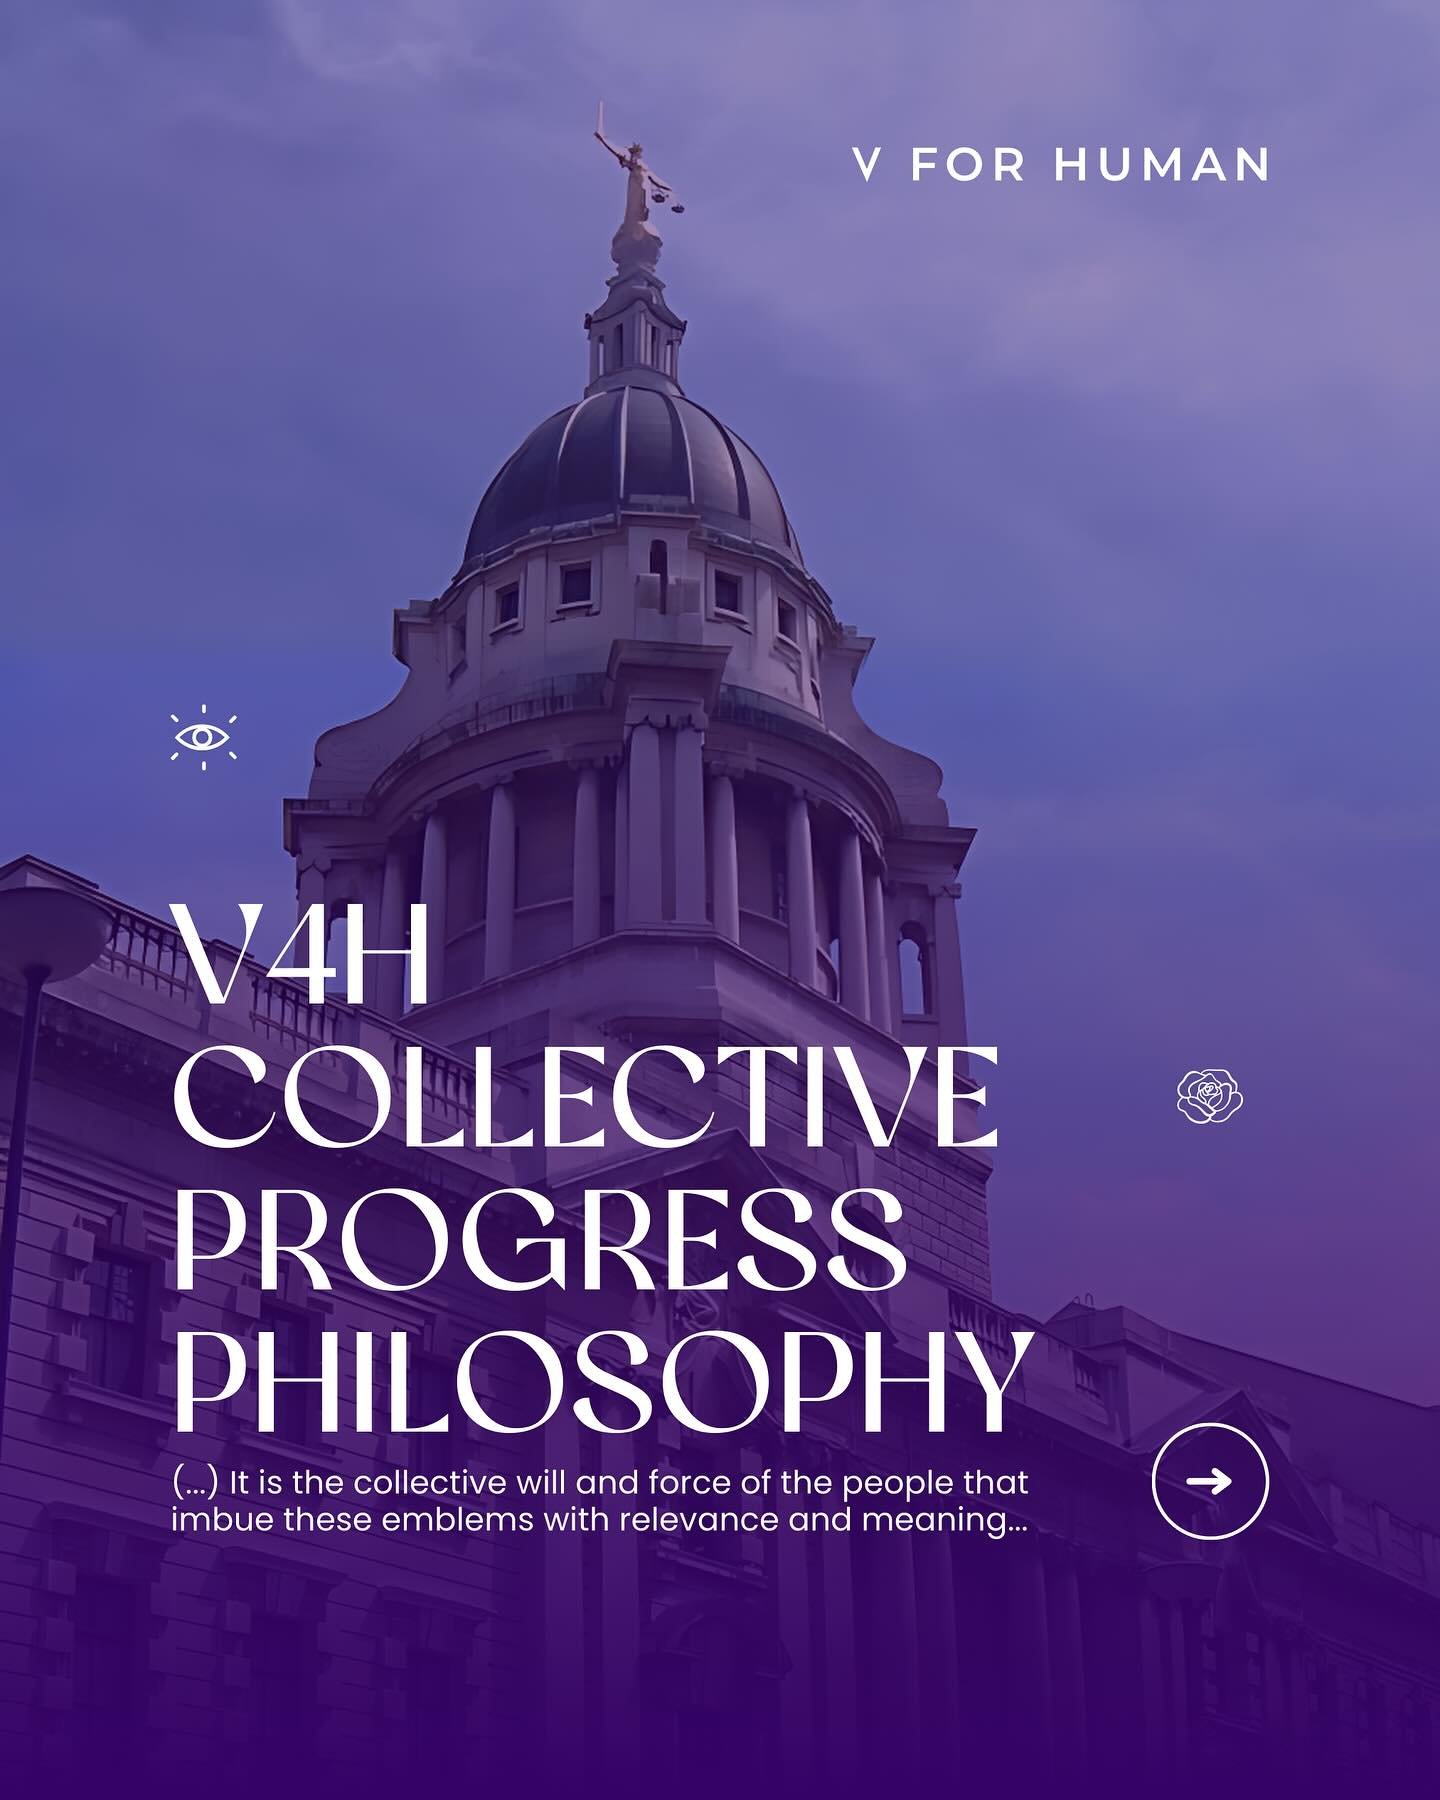 At V4H, we see true progress as a symphony of individuals united by knowledge and a shared vision. We believe that by encouraging intellectual curiosity and collective awareness, we can magnify the potential within each person to be a force for good 